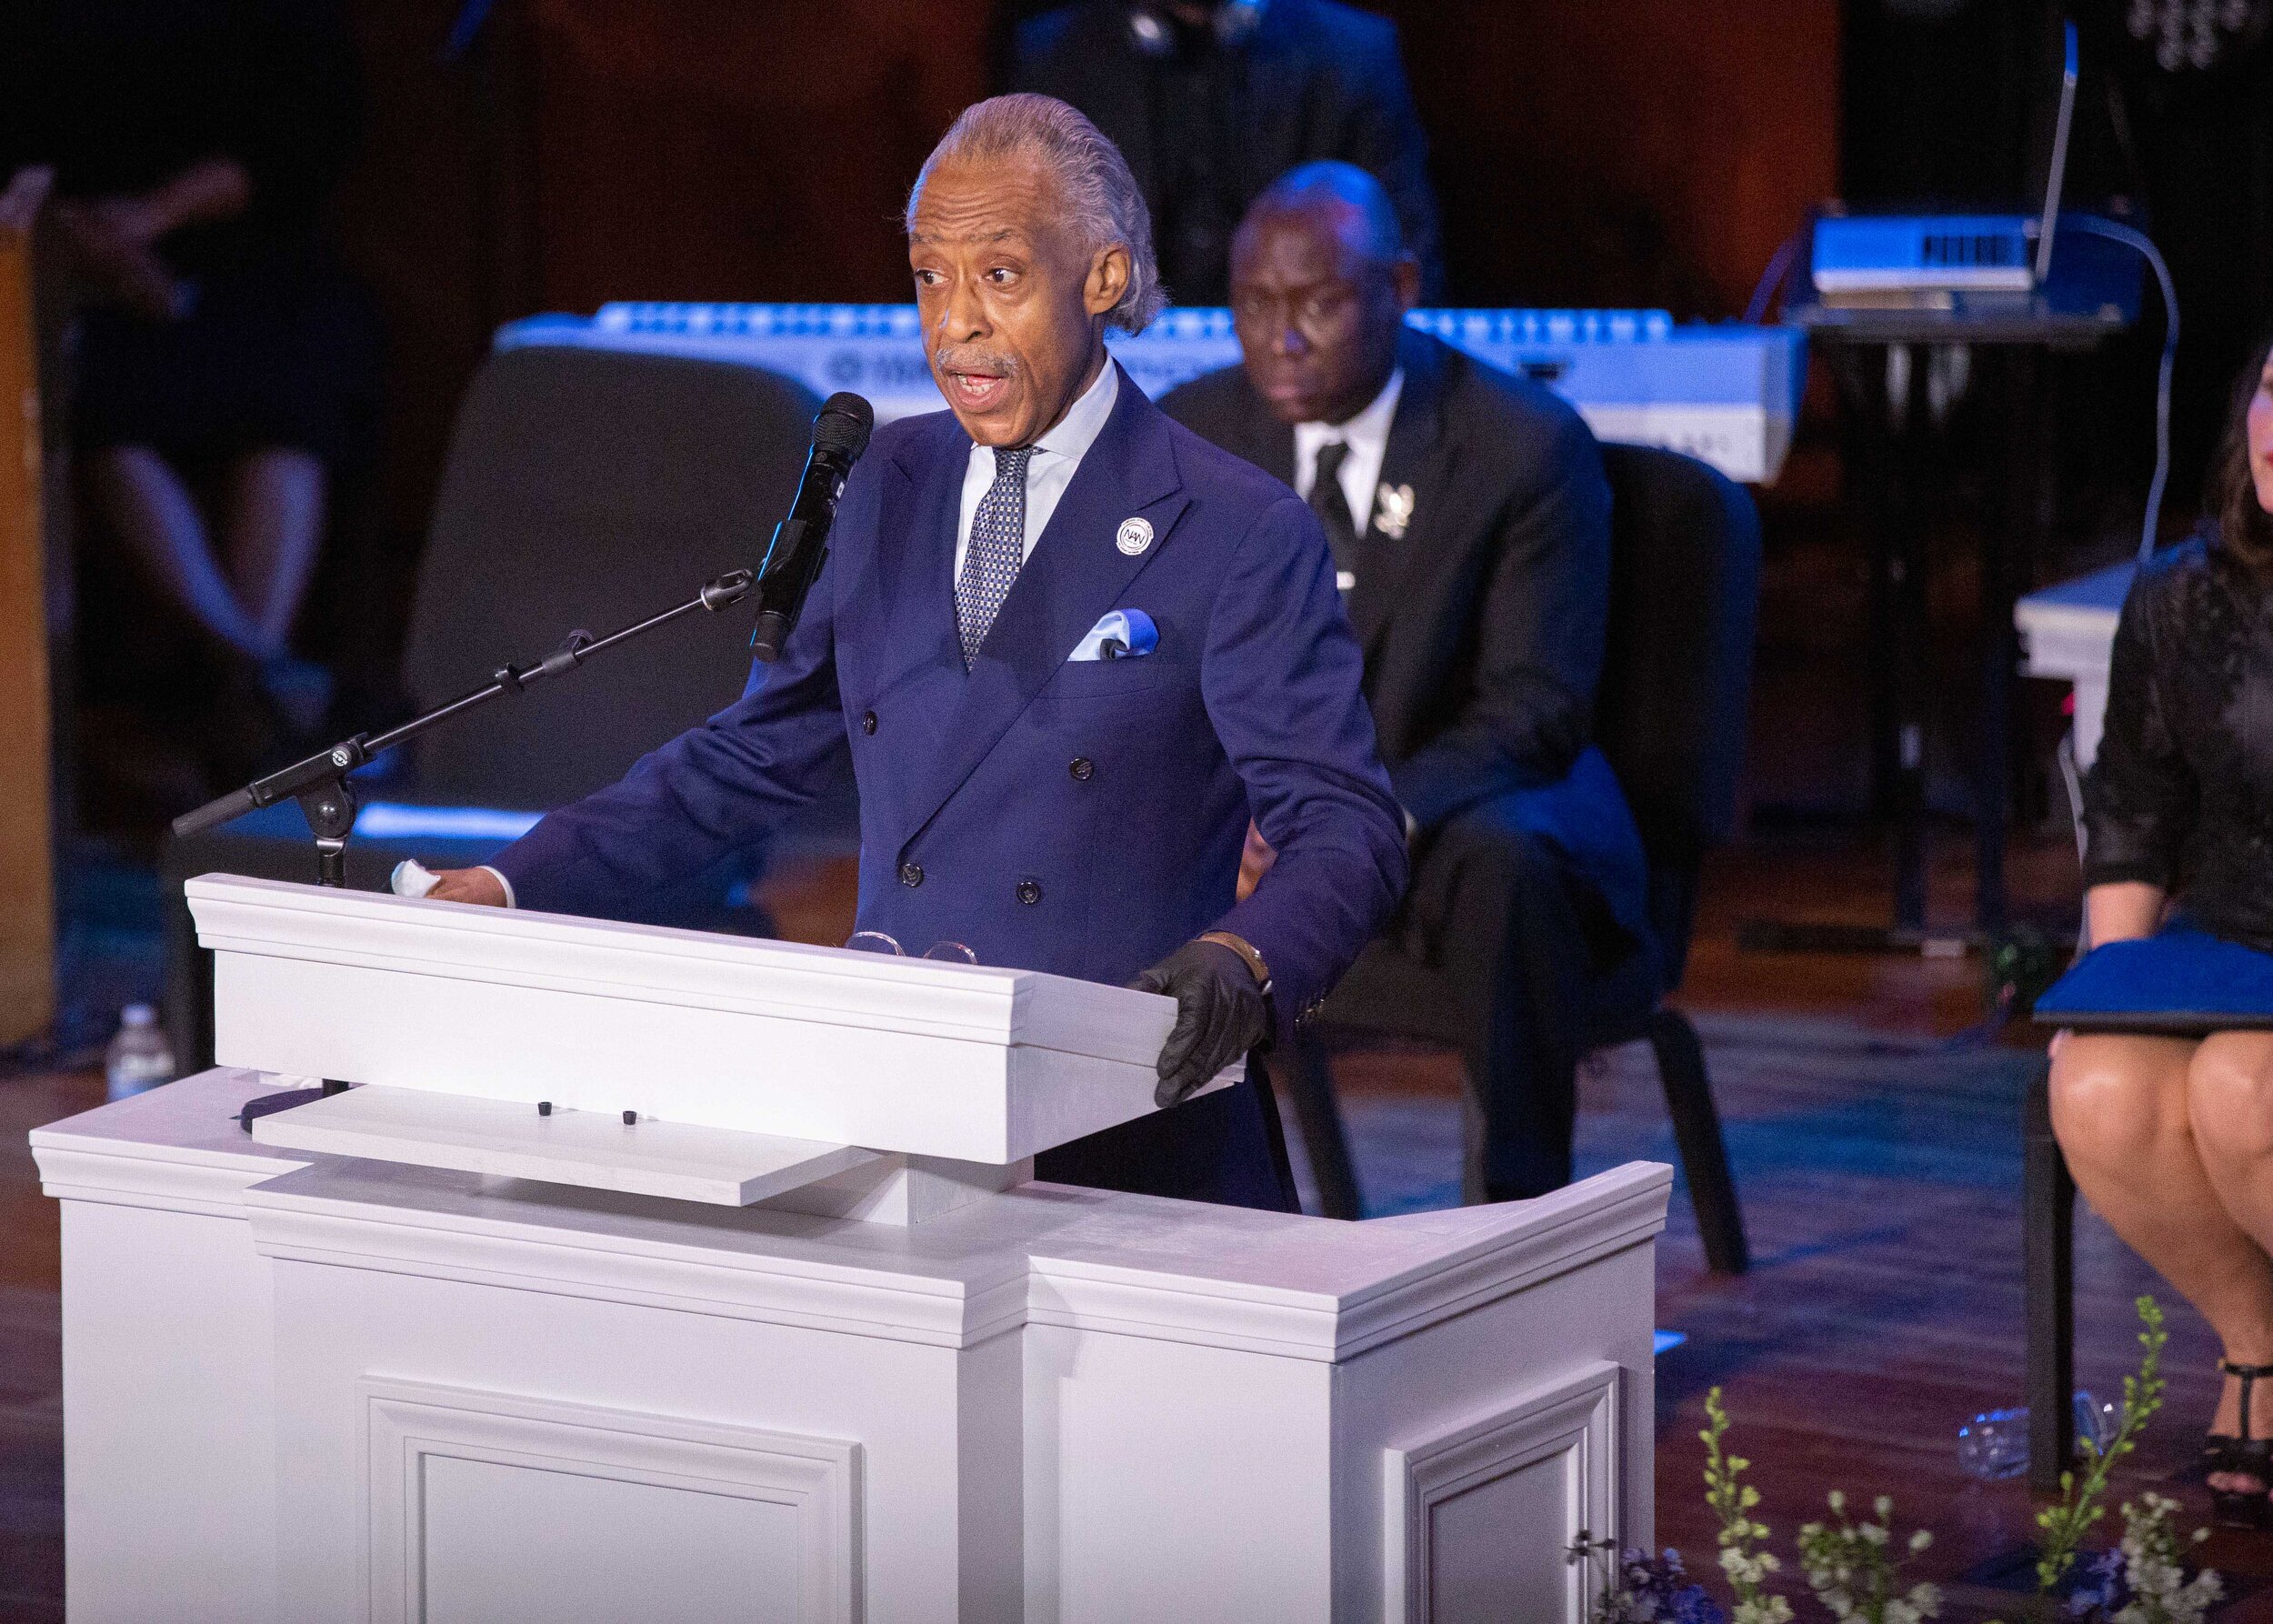  Rev. Al Sharpton gives a eulogy for George Floyd at his memorial at North Central University in Minneapolis, Minnesota on Jun 4, 2020. 